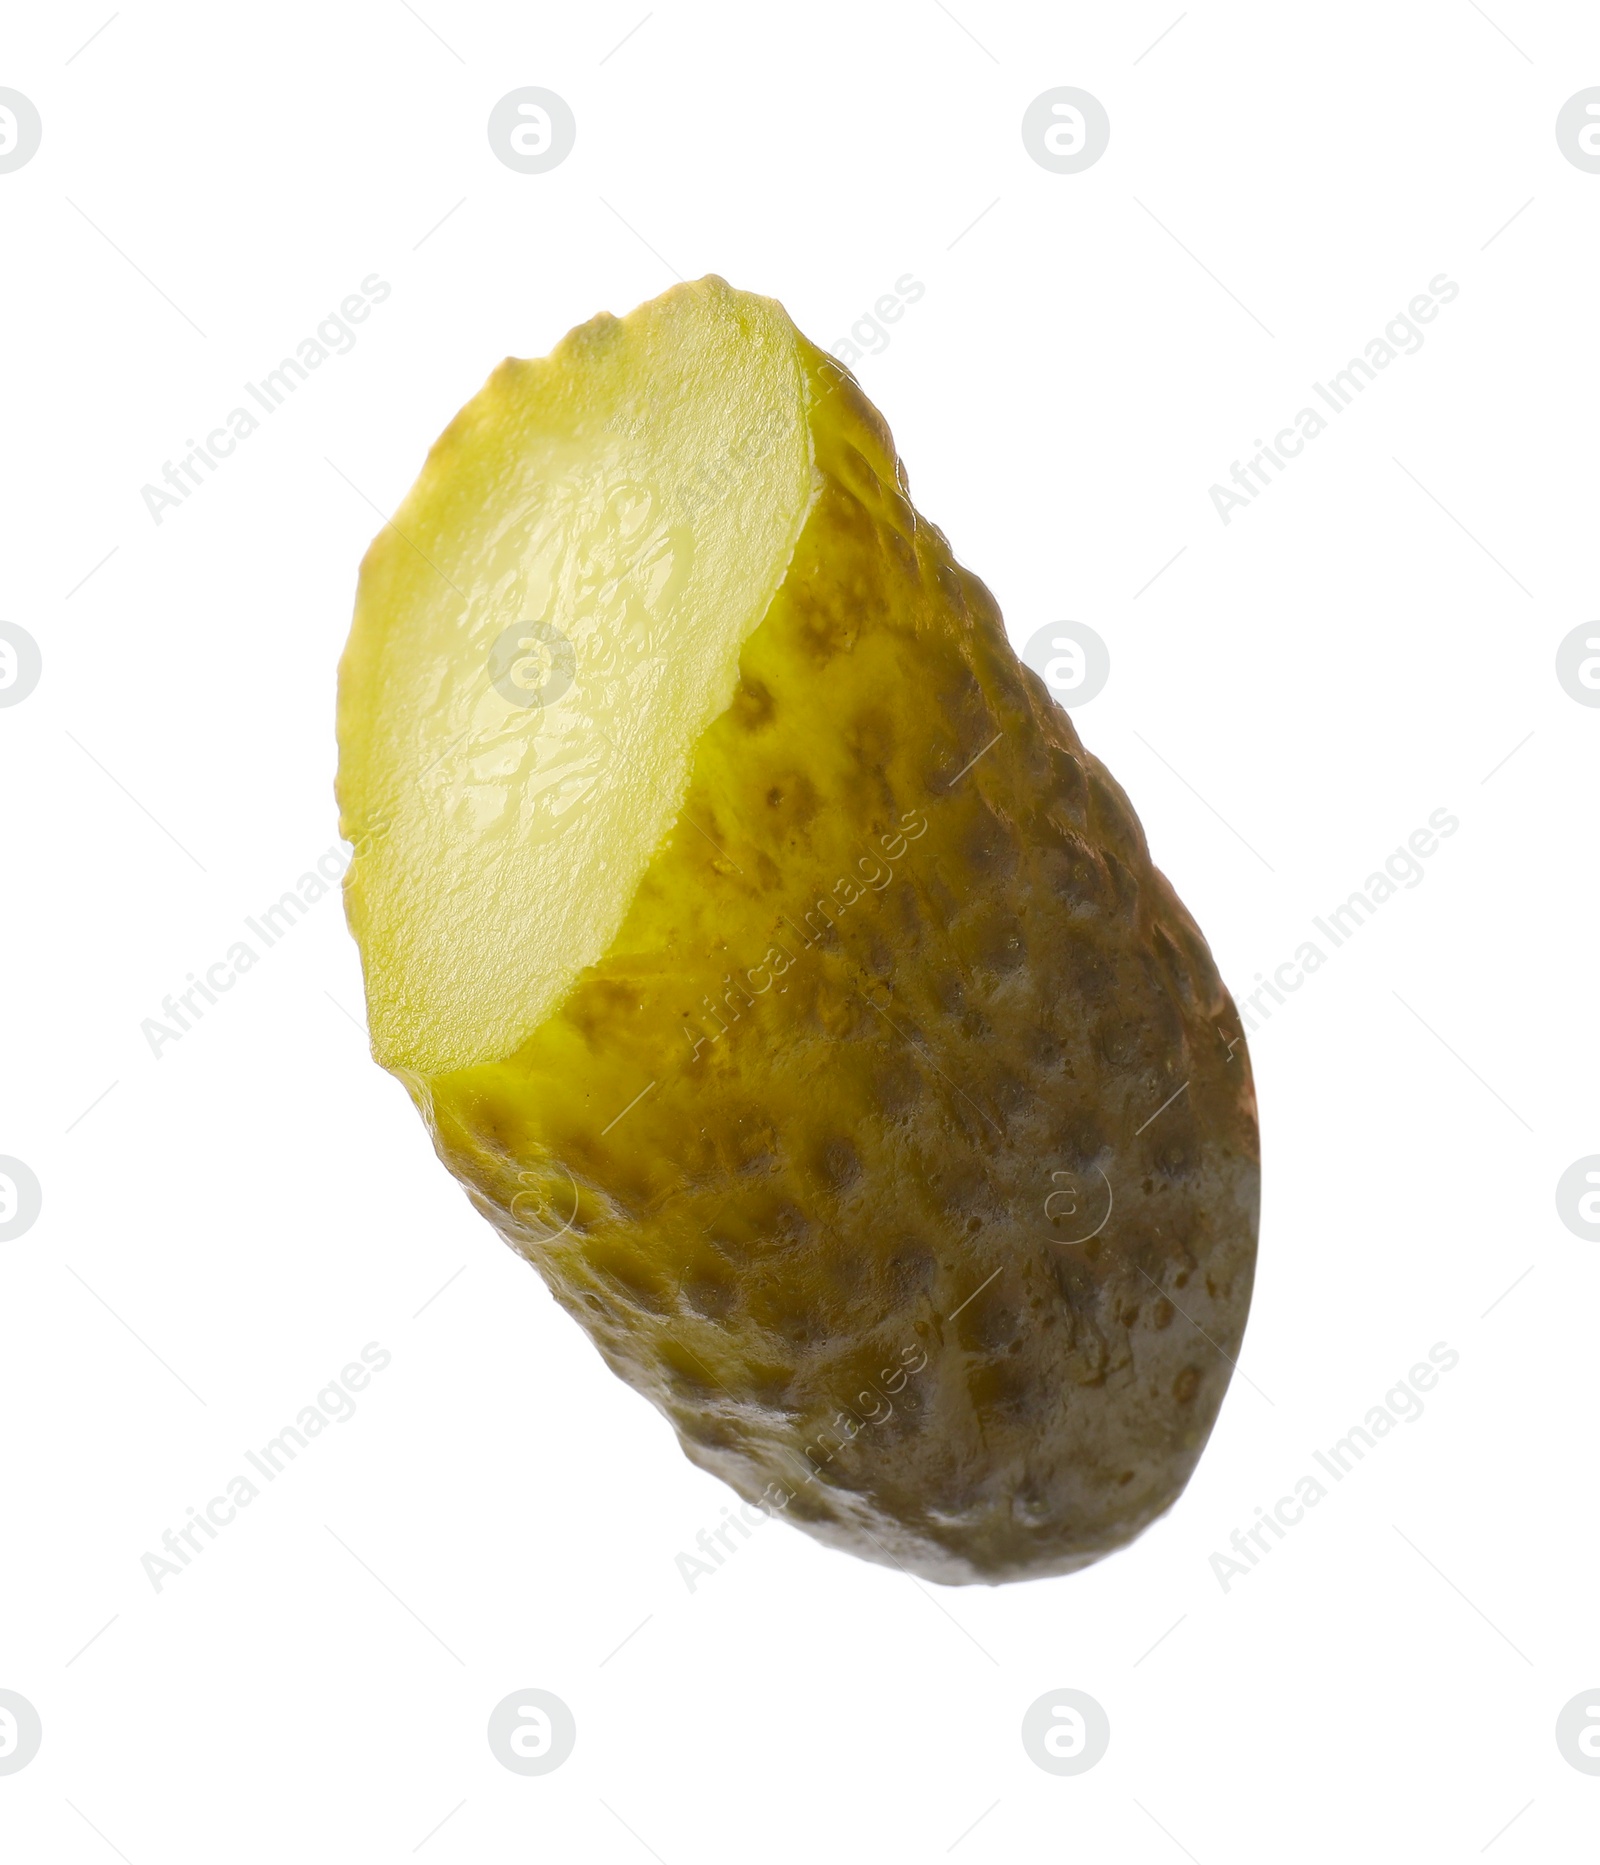 Photo of Piece of pickled cucumber isolated on white